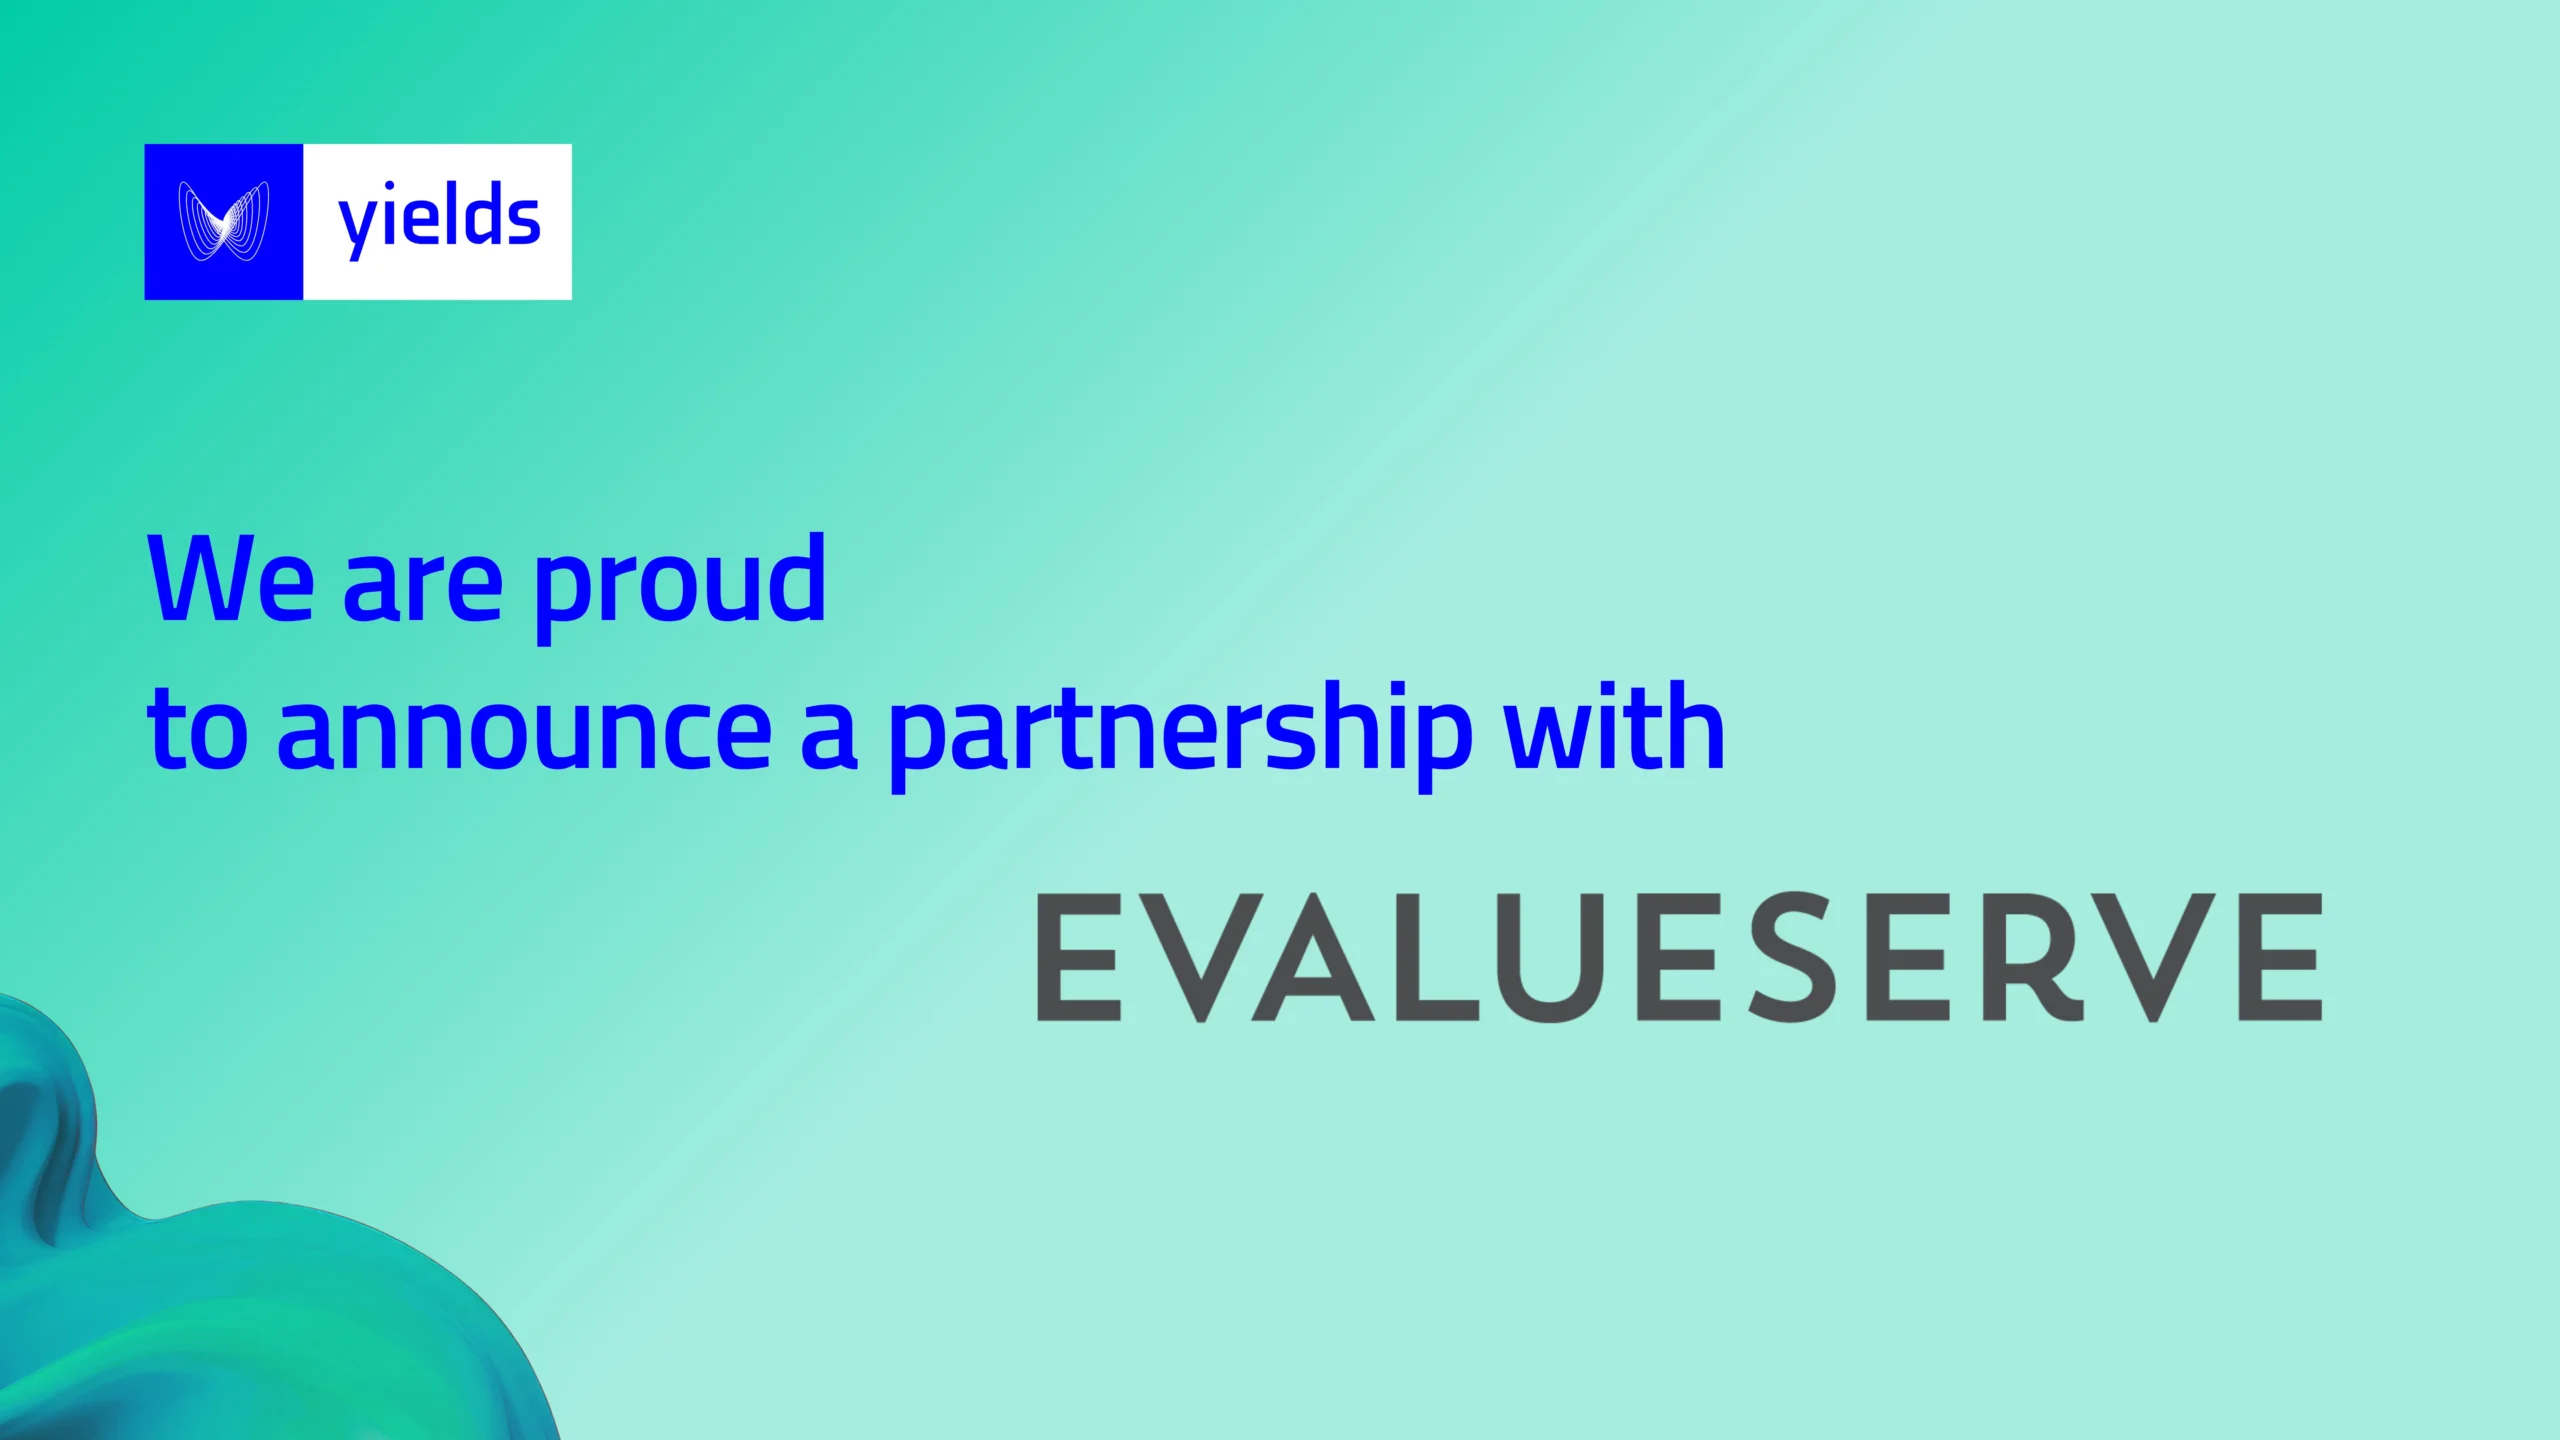 Yields and Evalueserve Form a Strategic Alliance